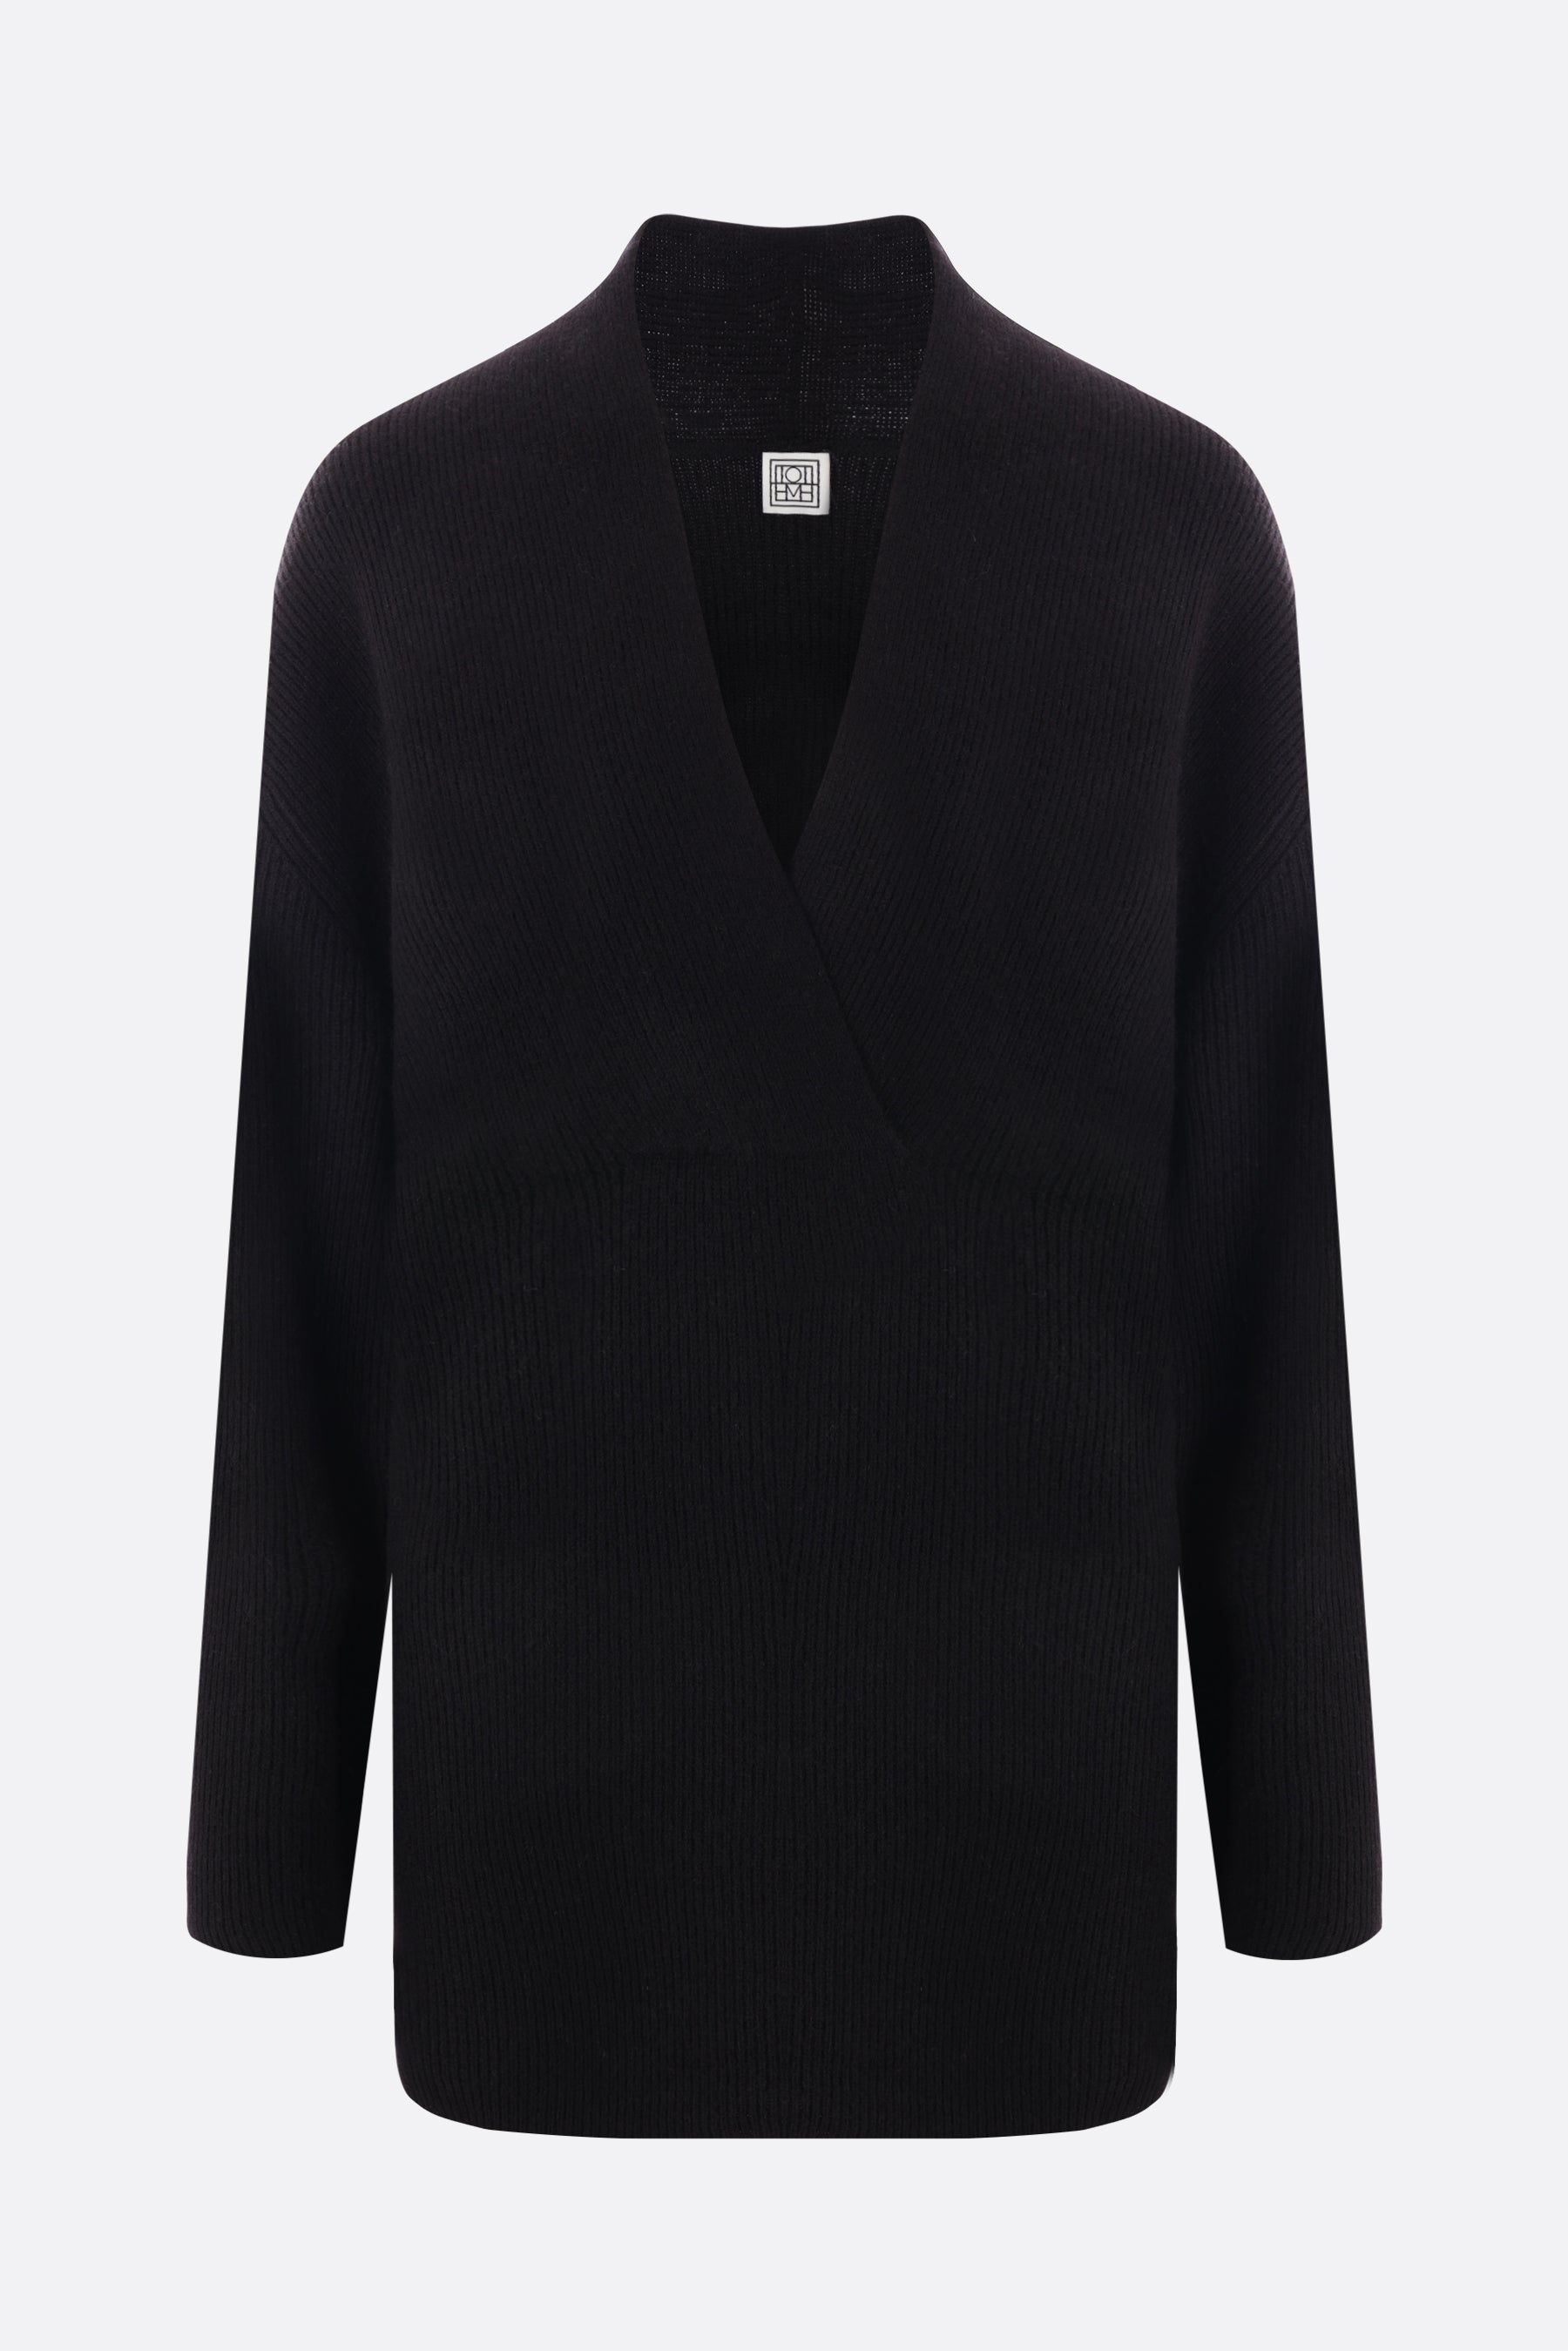 wool and cashmere oversized pullover